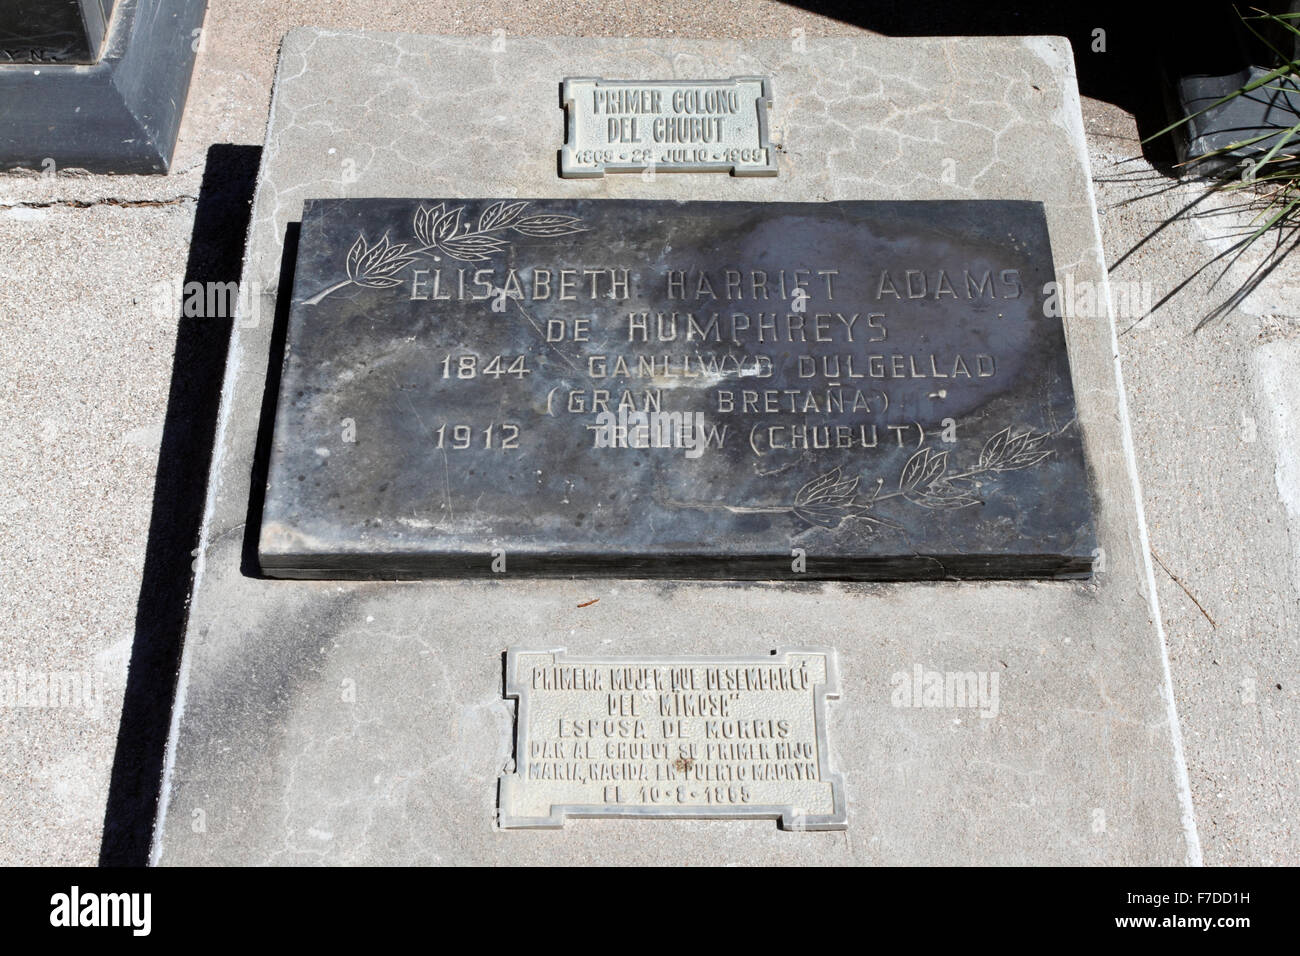 Elizabeth Humphreys grave, one of the first Welsh colonists of Chubut. Stock Photo